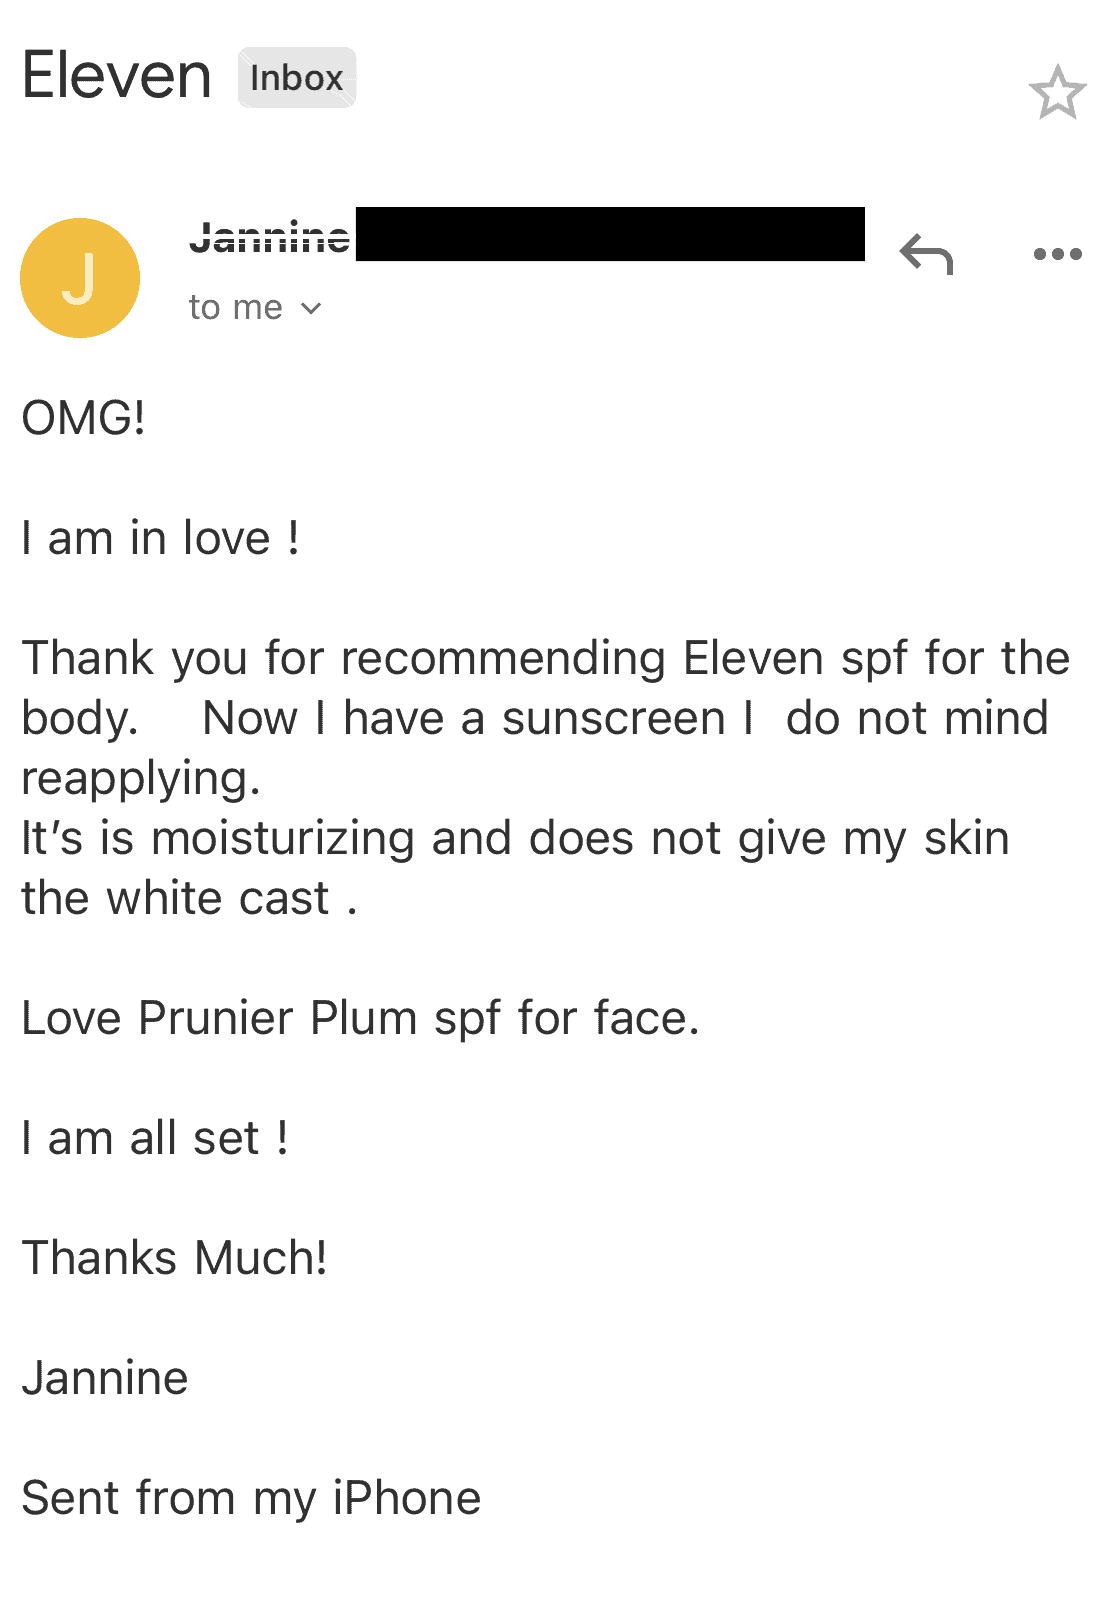 a screenshot of a message from a reader who appreciated the recommendation for the eleven body sunscreen